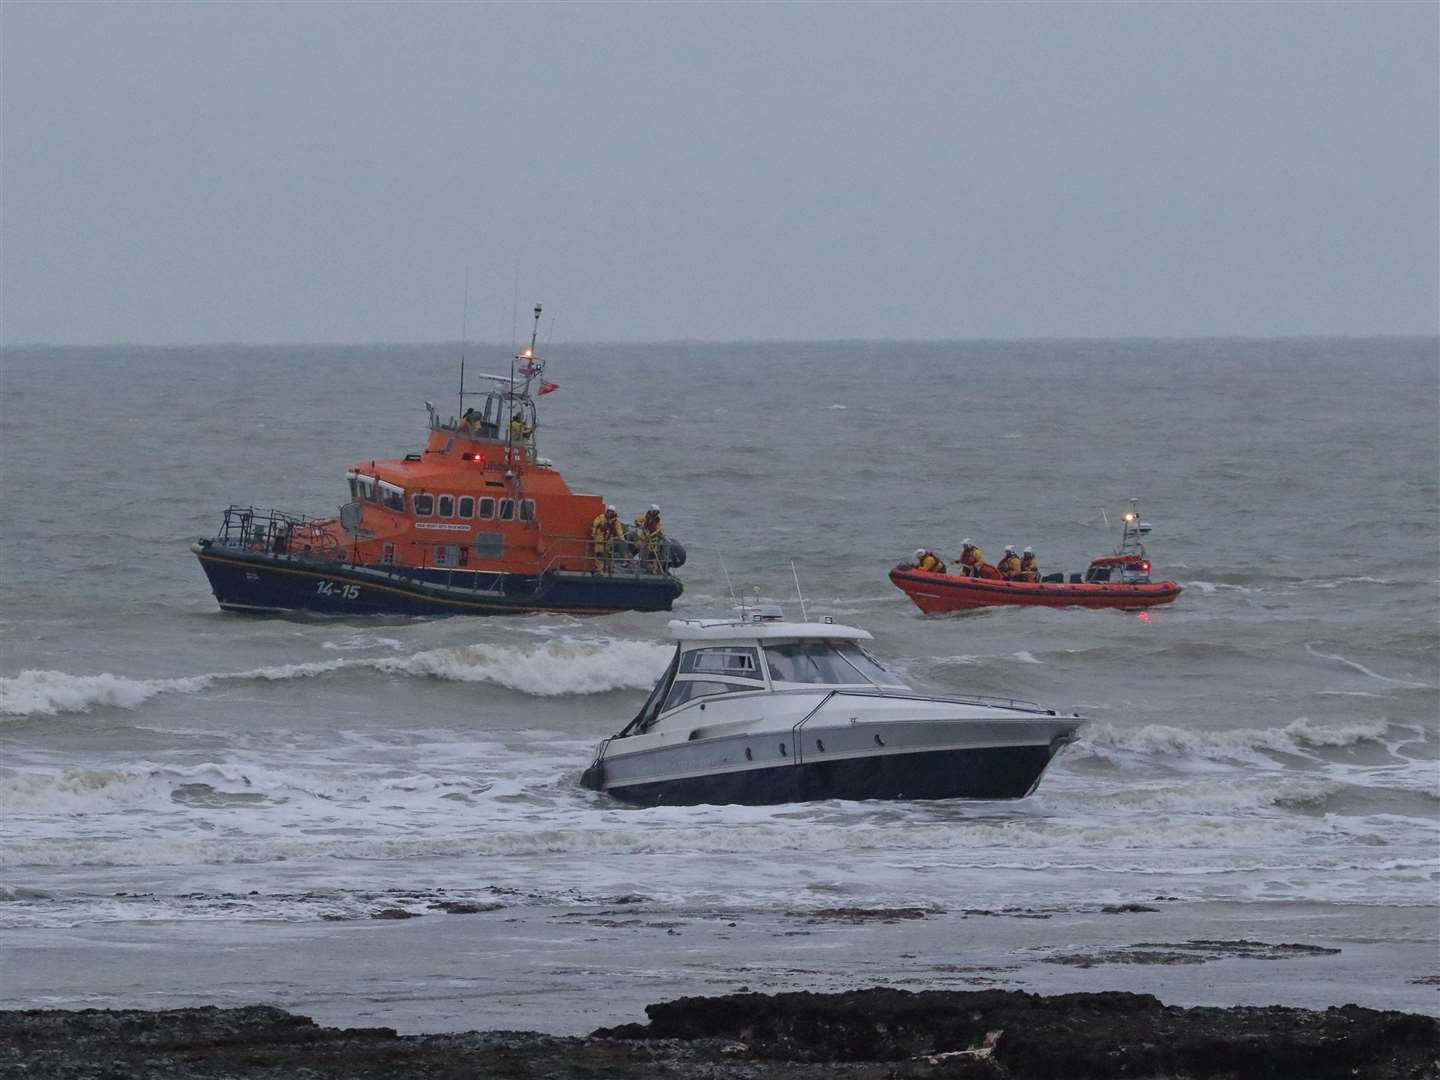 The two passengers were brought to safety. Picture: RNLI/Steve Burton